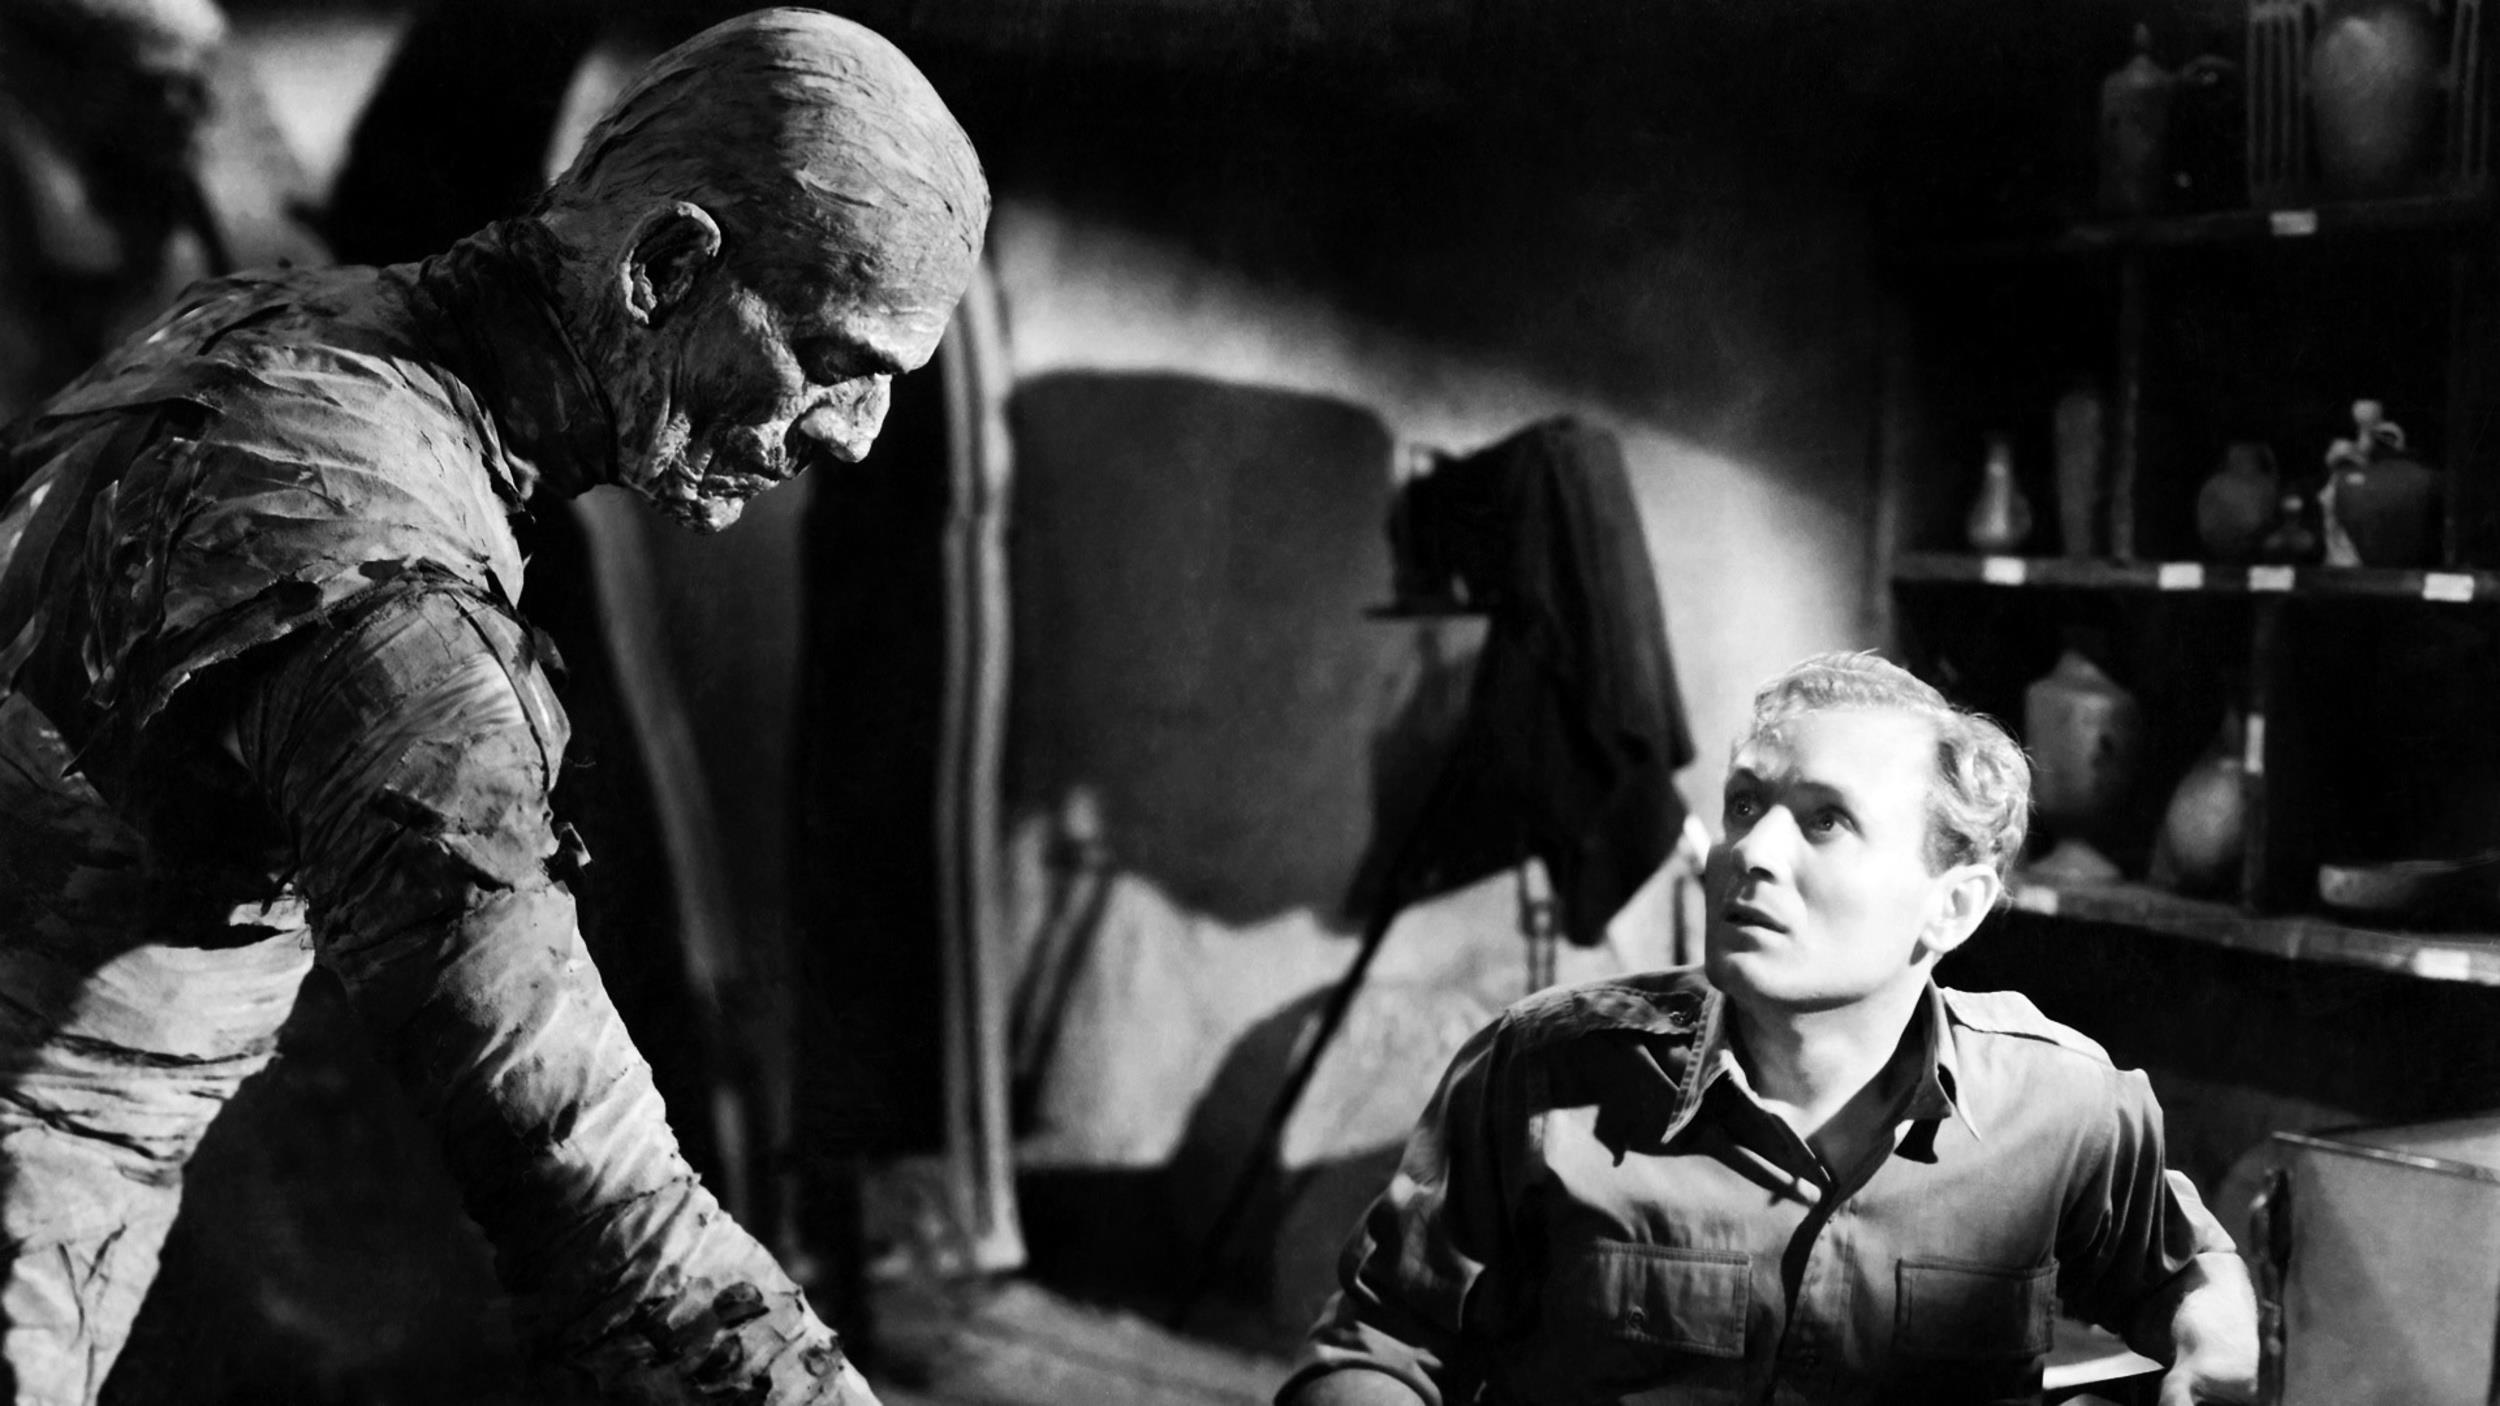 <p>Universal got six films out of its Mummy franchise but only managed to retain Boris Karloff for one go-round as the resurrected Imhotep. Tom Tyler, Lon Chaney Jr. and Eddie Parker would all take their turns under the gauze, but unlike the other Universal franchises, none of the sequels came close to matching the quality of the original. It’s the least interesting of the classic franchises (reboots included).</p><p><a href='https://www.msn.com/en-us/community/channel/vid-cj9pqbr0vn9in2b6ddcd8sfgpfq6x6utp44fssrv6mc2gtybw0us'>Follow us on MSN to see more of our exclusive entertainment content.</a></p>